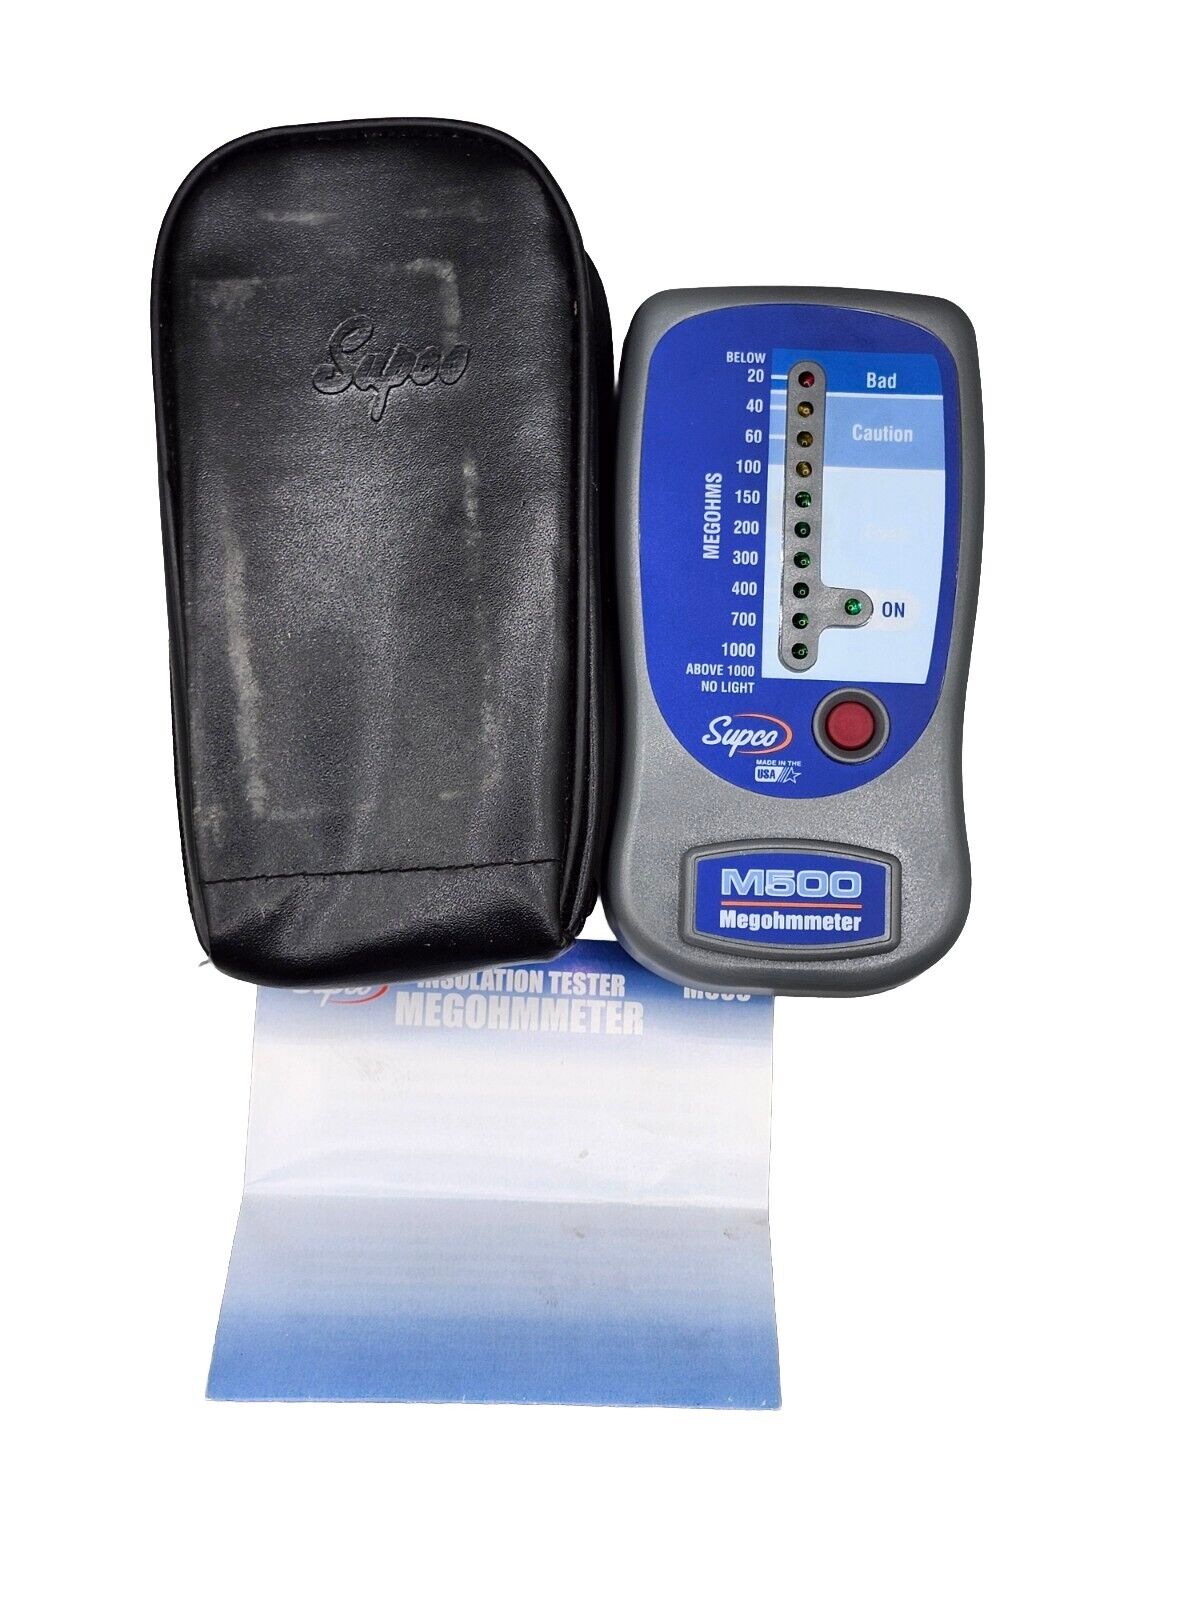 SUPCO M500 Insulation Tester/Electronic Megohmmeter with Soft Carrying Case